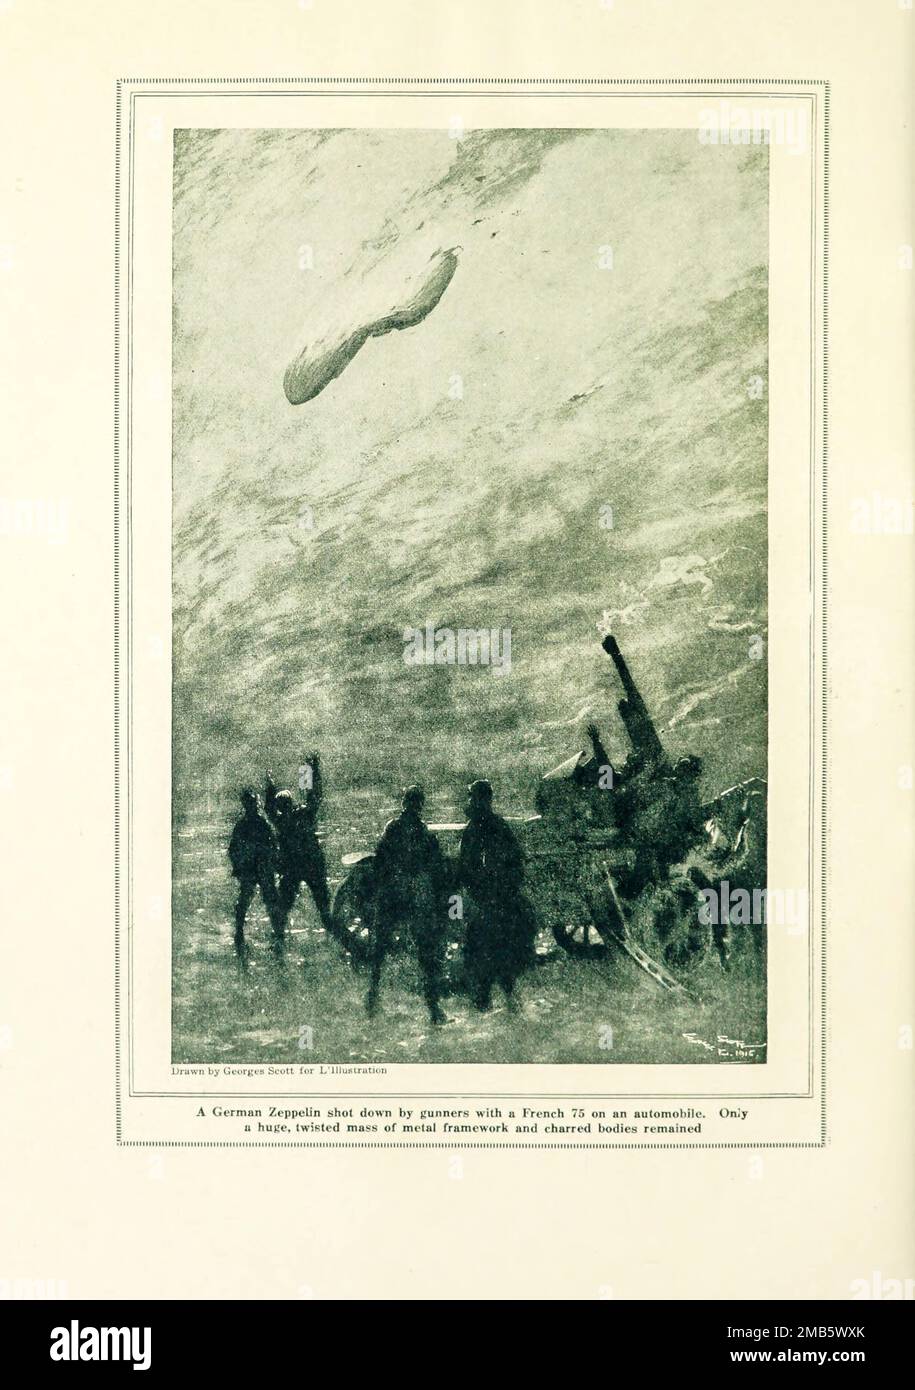 German Zeppelin Shot Down by a French 75 from the book The story of the great war; the complete historical records of events to date DIPLOMATIC AND STATE PAPERS by Reynolds, Francis Joseph, 1867-1937; Churchill, Allen Leon; Miller, Francis Trevelyan, 1877-1959; Wood, Leonard, 1860-1927; Knight, Austin Melvin, 1854-1927; Palmer, Frederick, 1873-1958; Simonds, Frank Herbert, 1878-; Ruhl, Arthur Brown, 1876-  Volume VIII Published 1920 Stock Photo